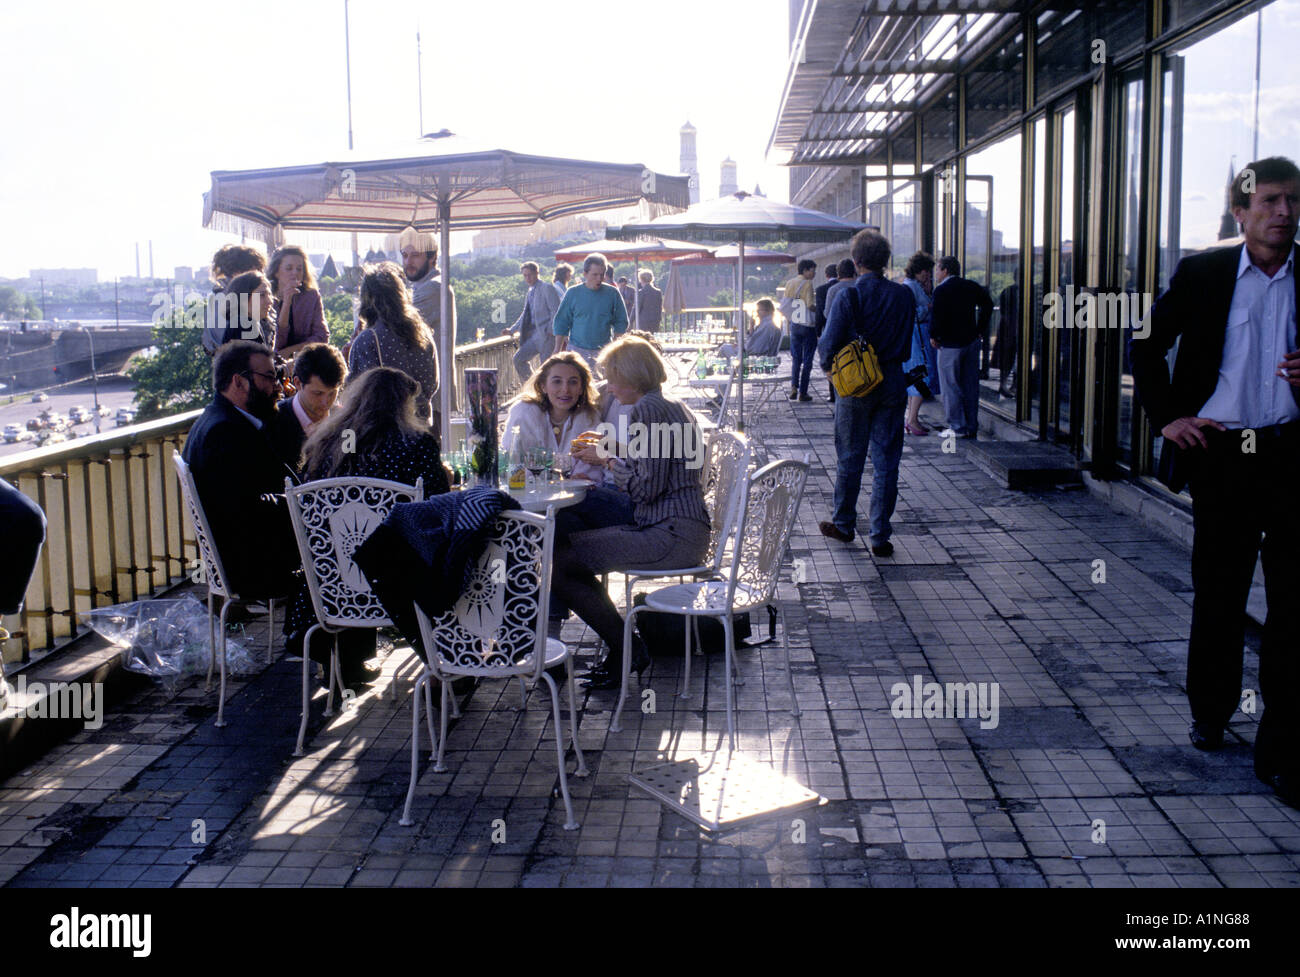 Mosca OUTDOOR CAFE Foto Stock